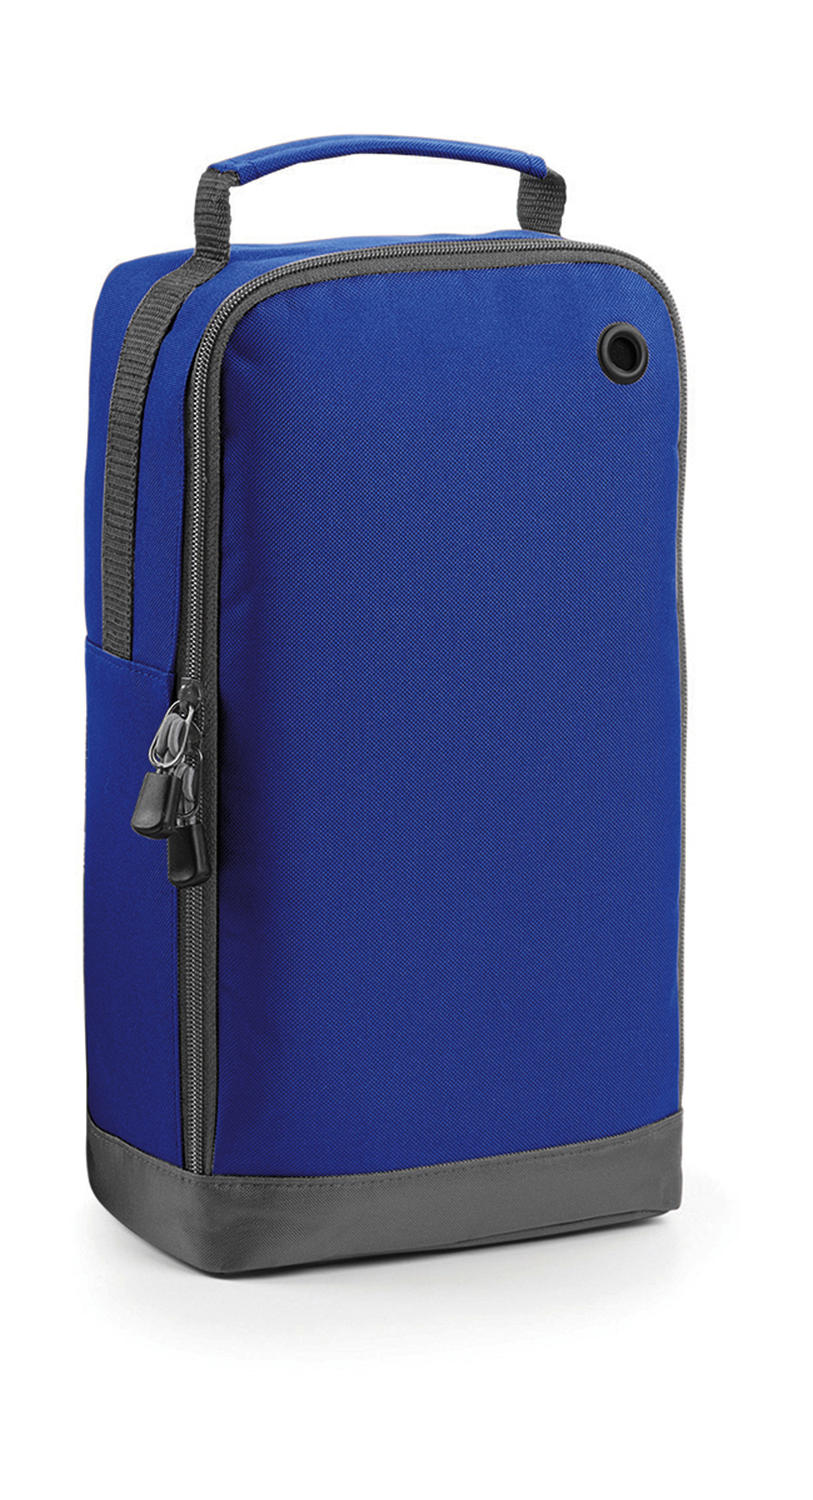  Sports Shoe/Accessory Bag in Farbe Bright Royal